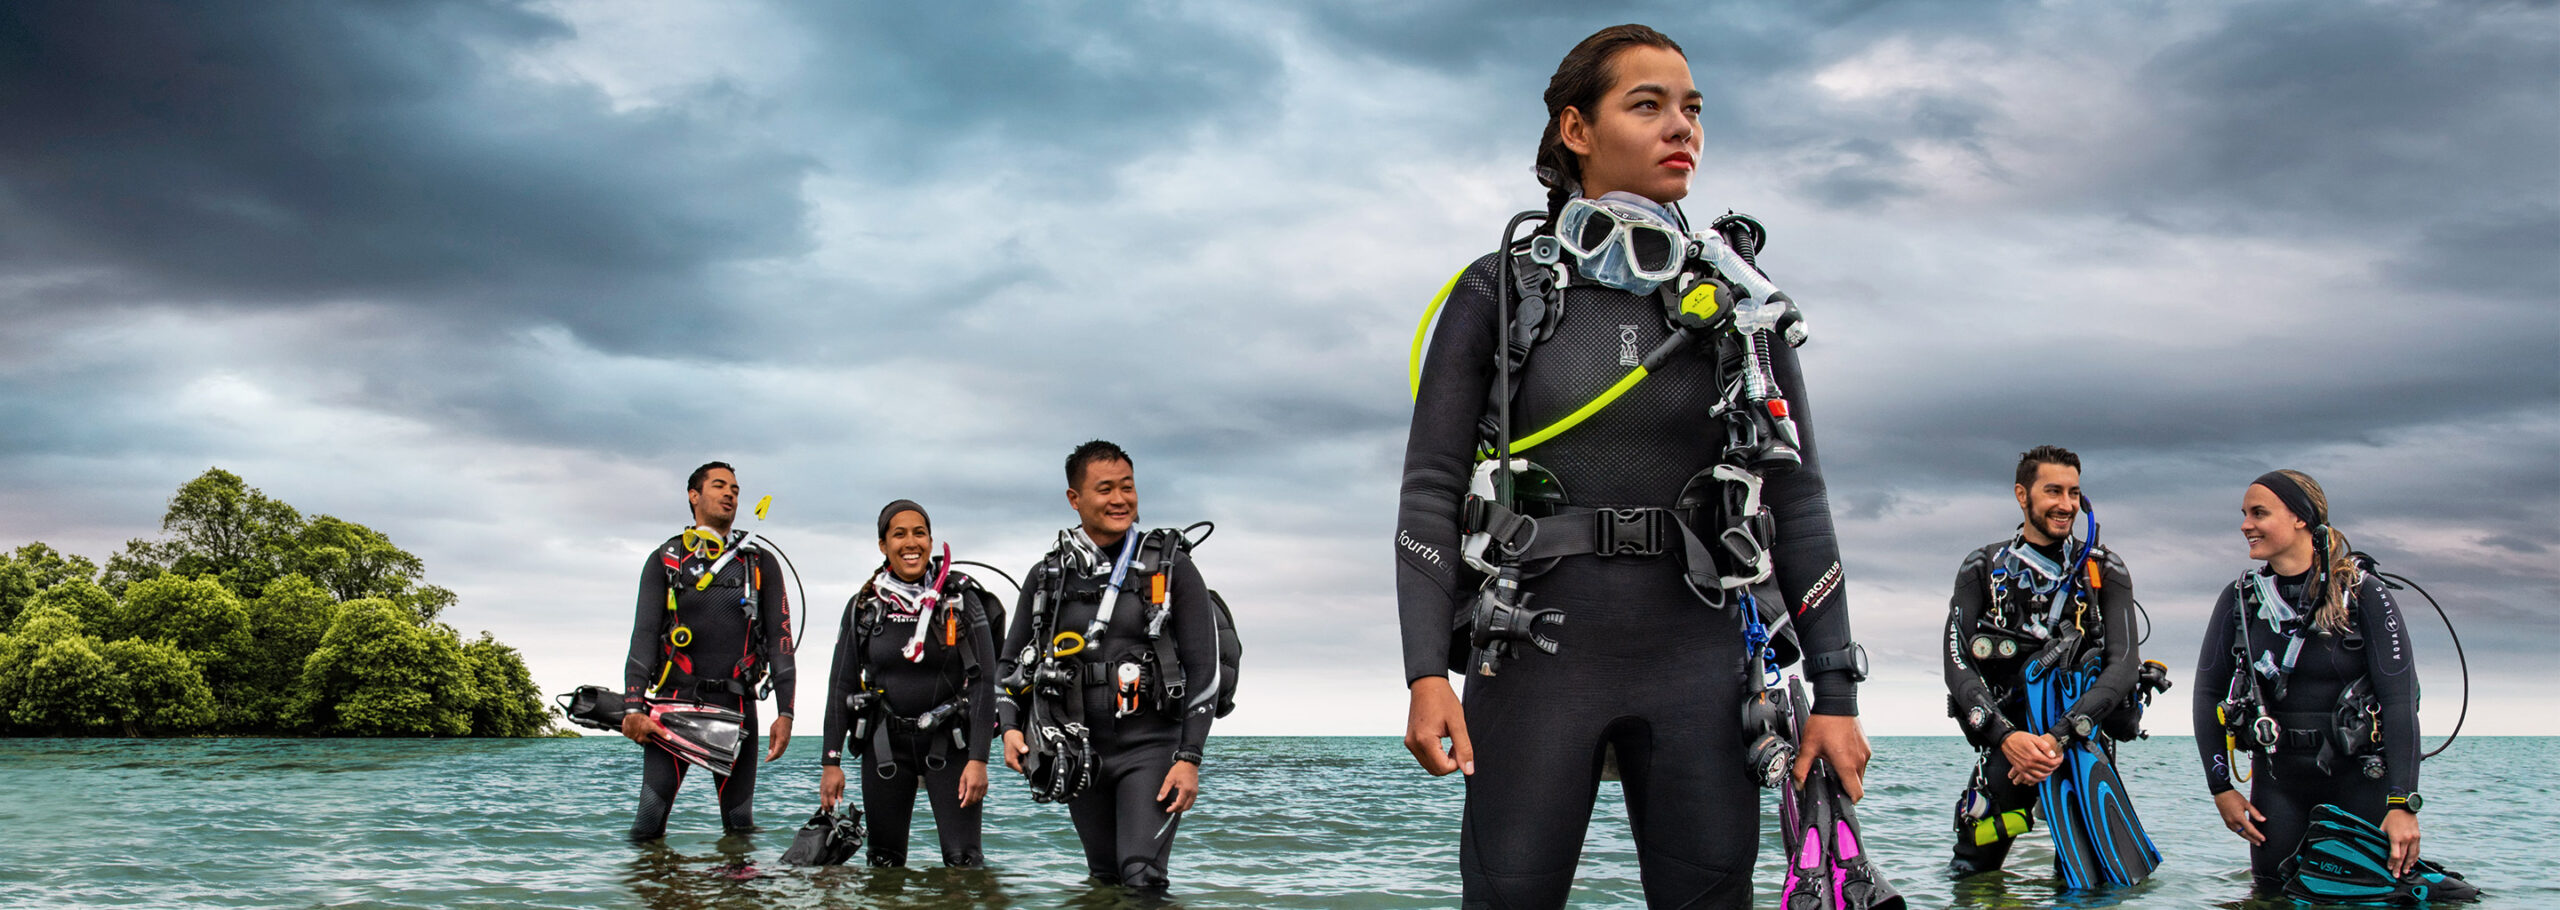 Scuba Diving Training Lessons and Certification in Dallas TX